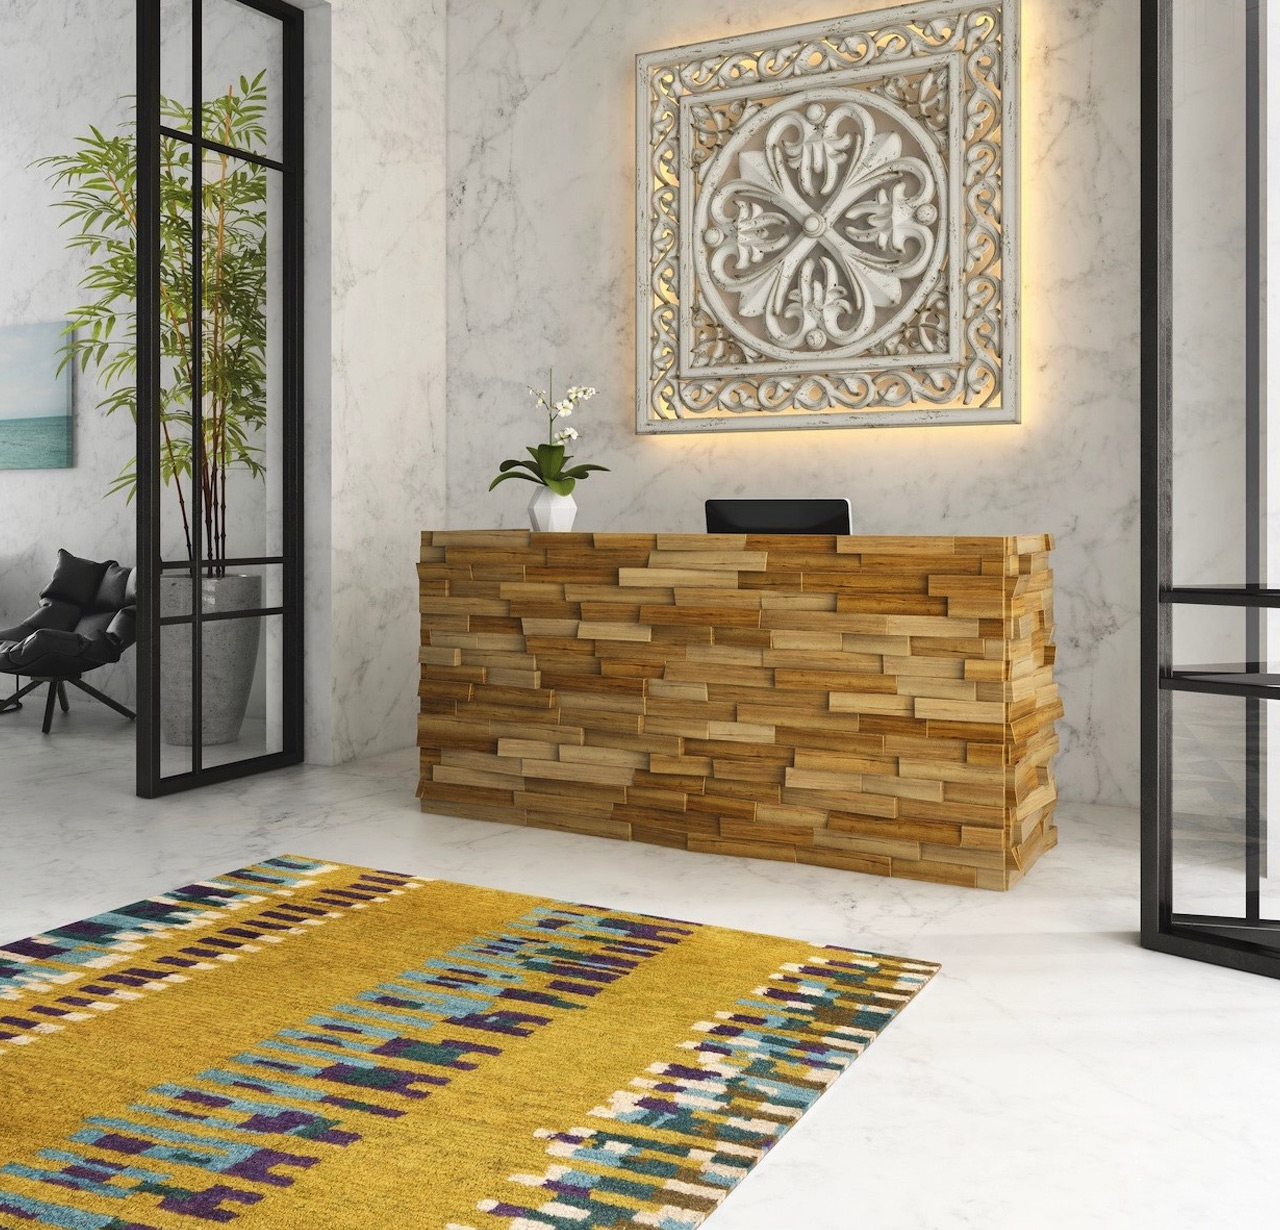 Rug in front of a wooden sideboard